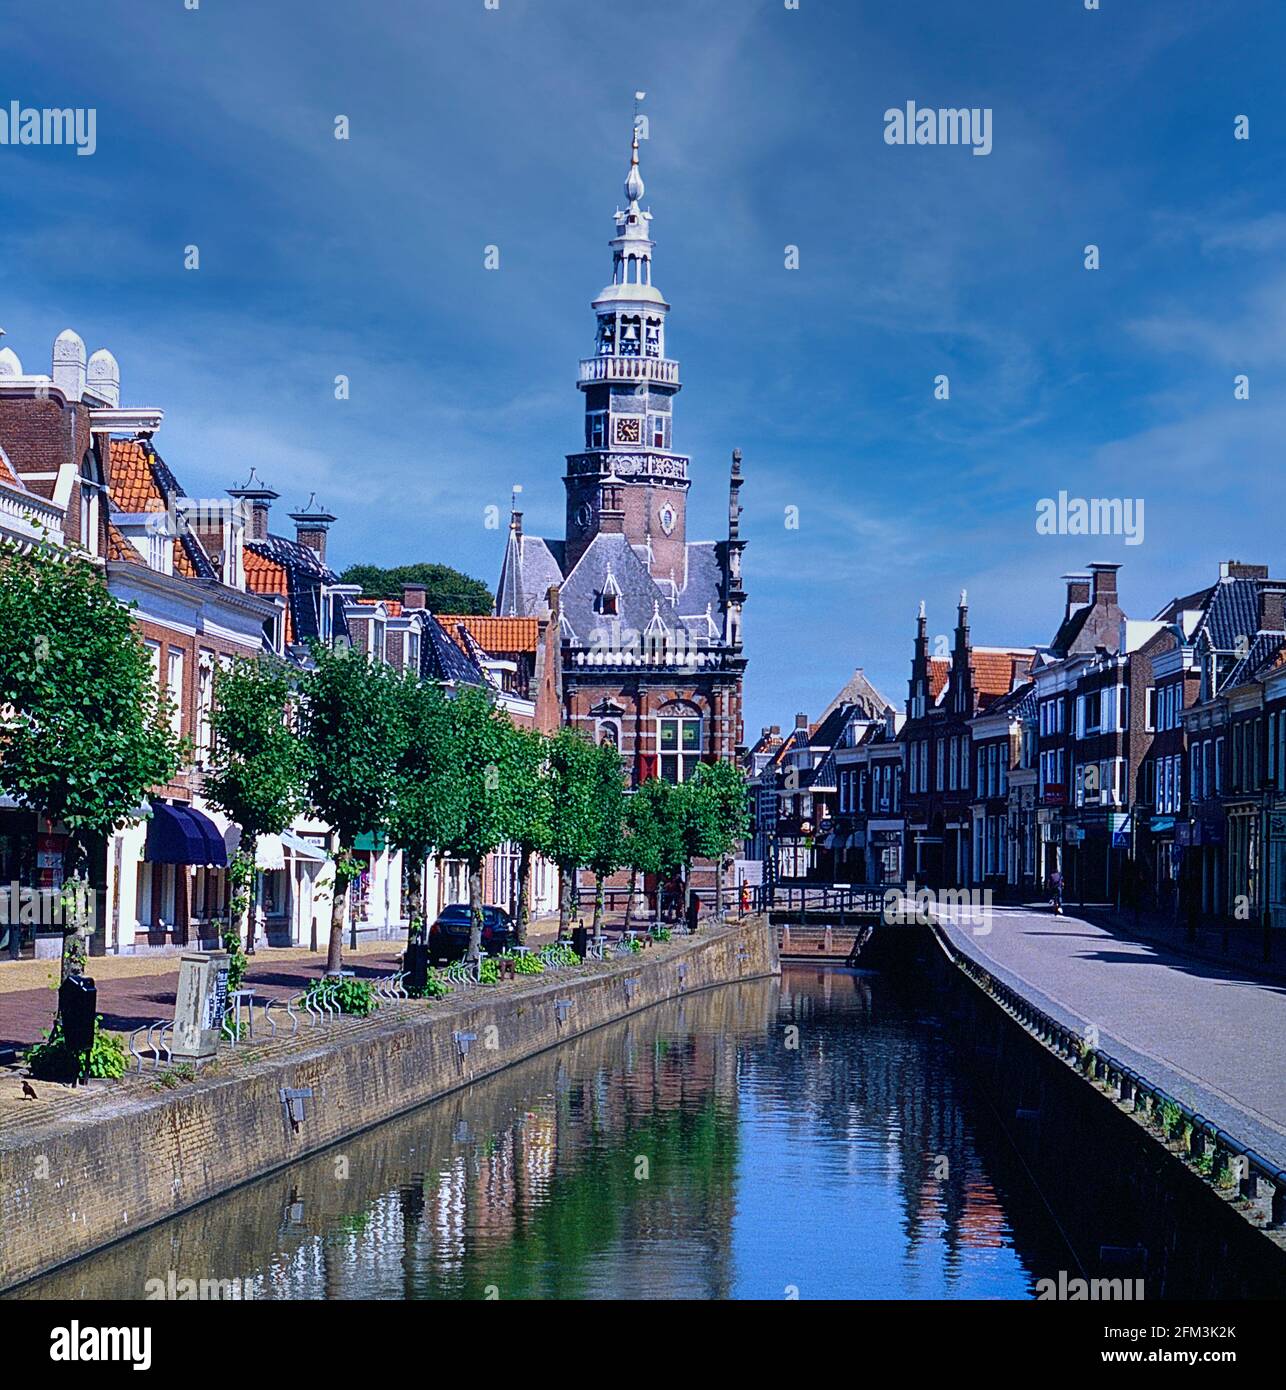 View of a Canal in Alkmaar, The Netherlands Stock Photo